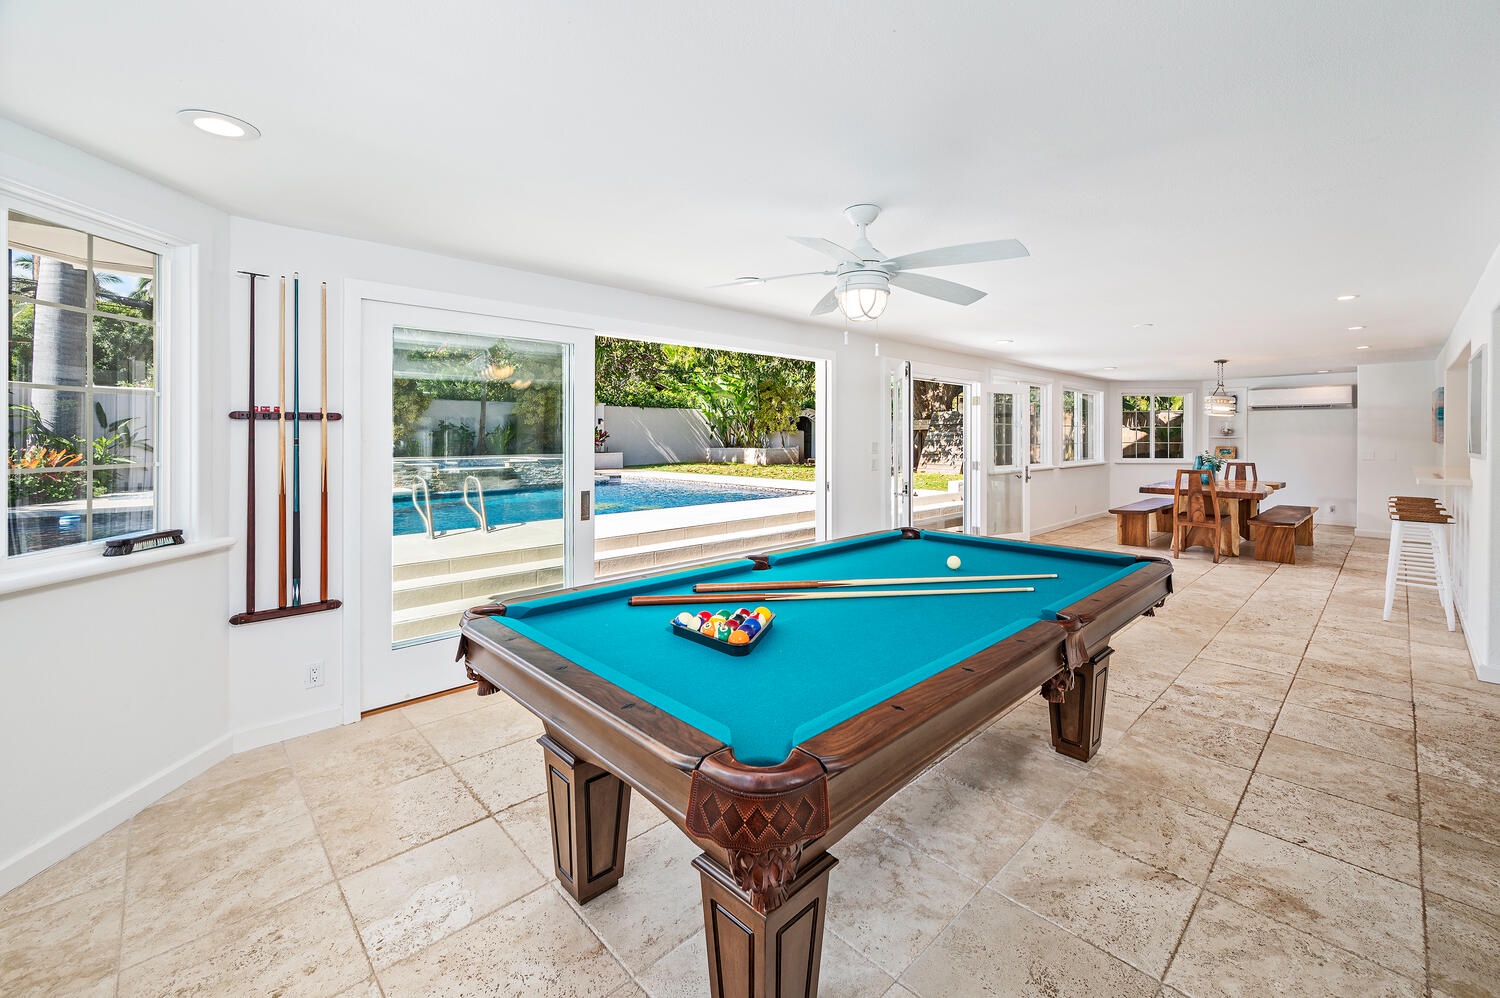 Kailua Vacation Rentals, Villa Hui Hou - Challenge friends to a game on the sleek pool table, where memories and laughter are guaranteed.